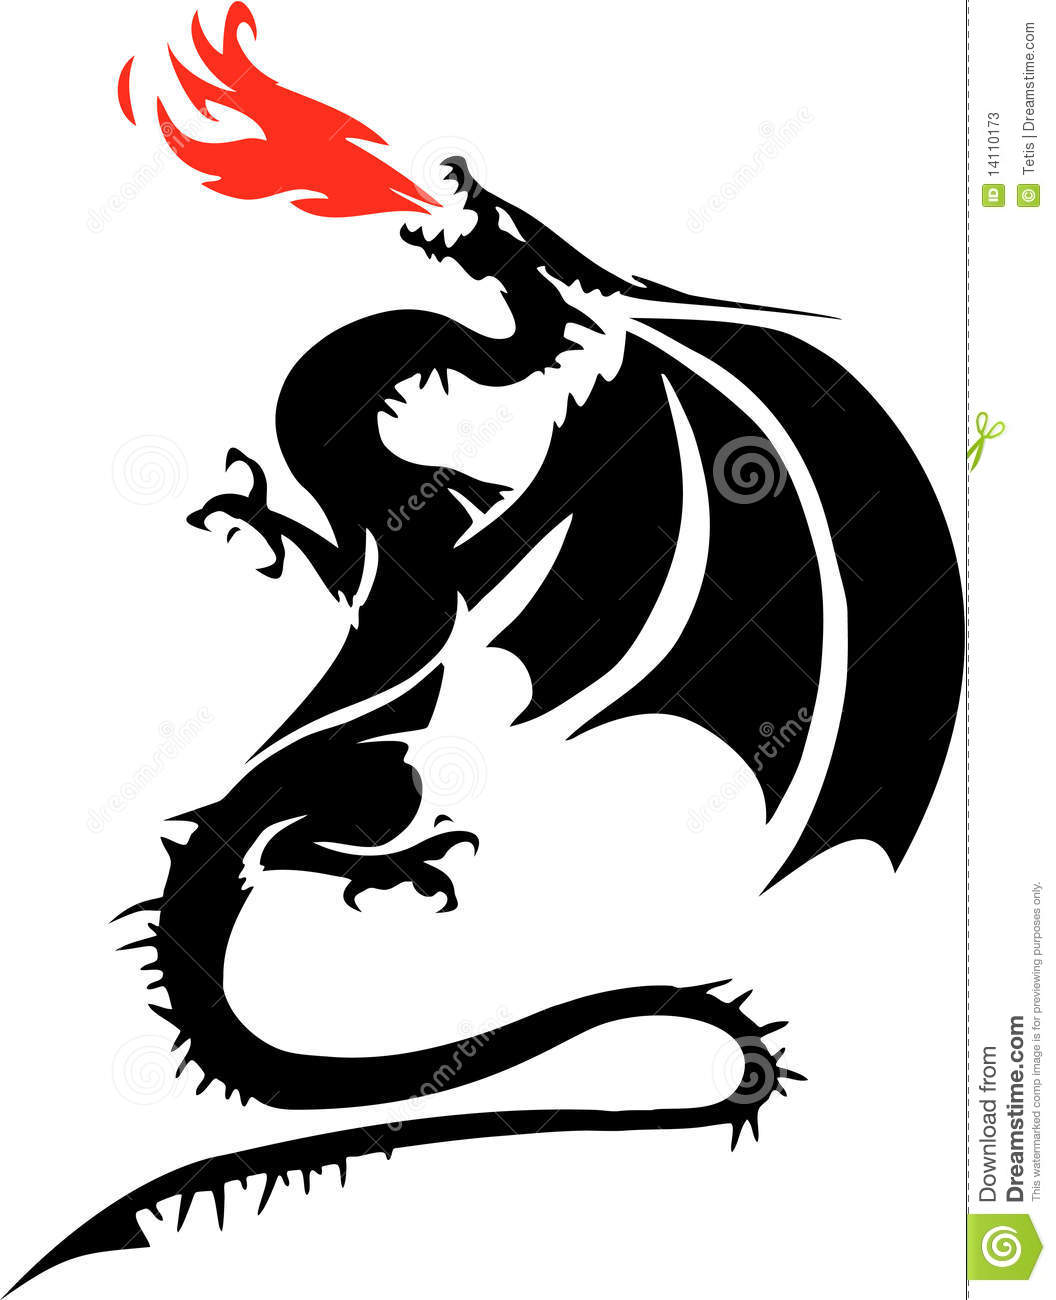 Black And White Drawing Of A Winged Dragon Breathing Red Flames